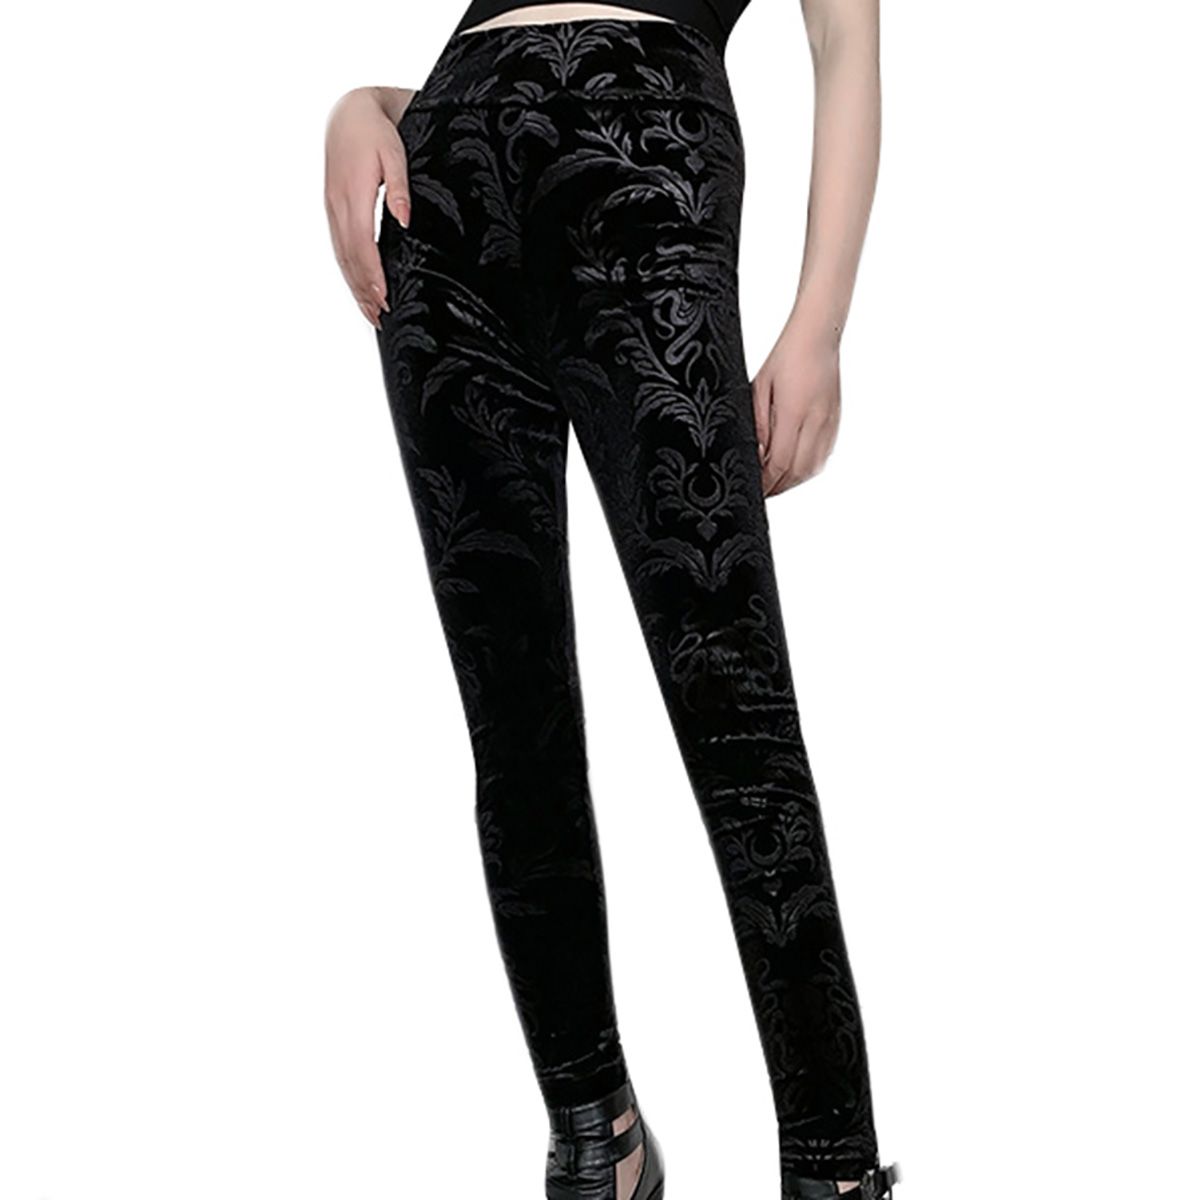 Melody wear leather leggings anti cellulite femme aesthetic pants